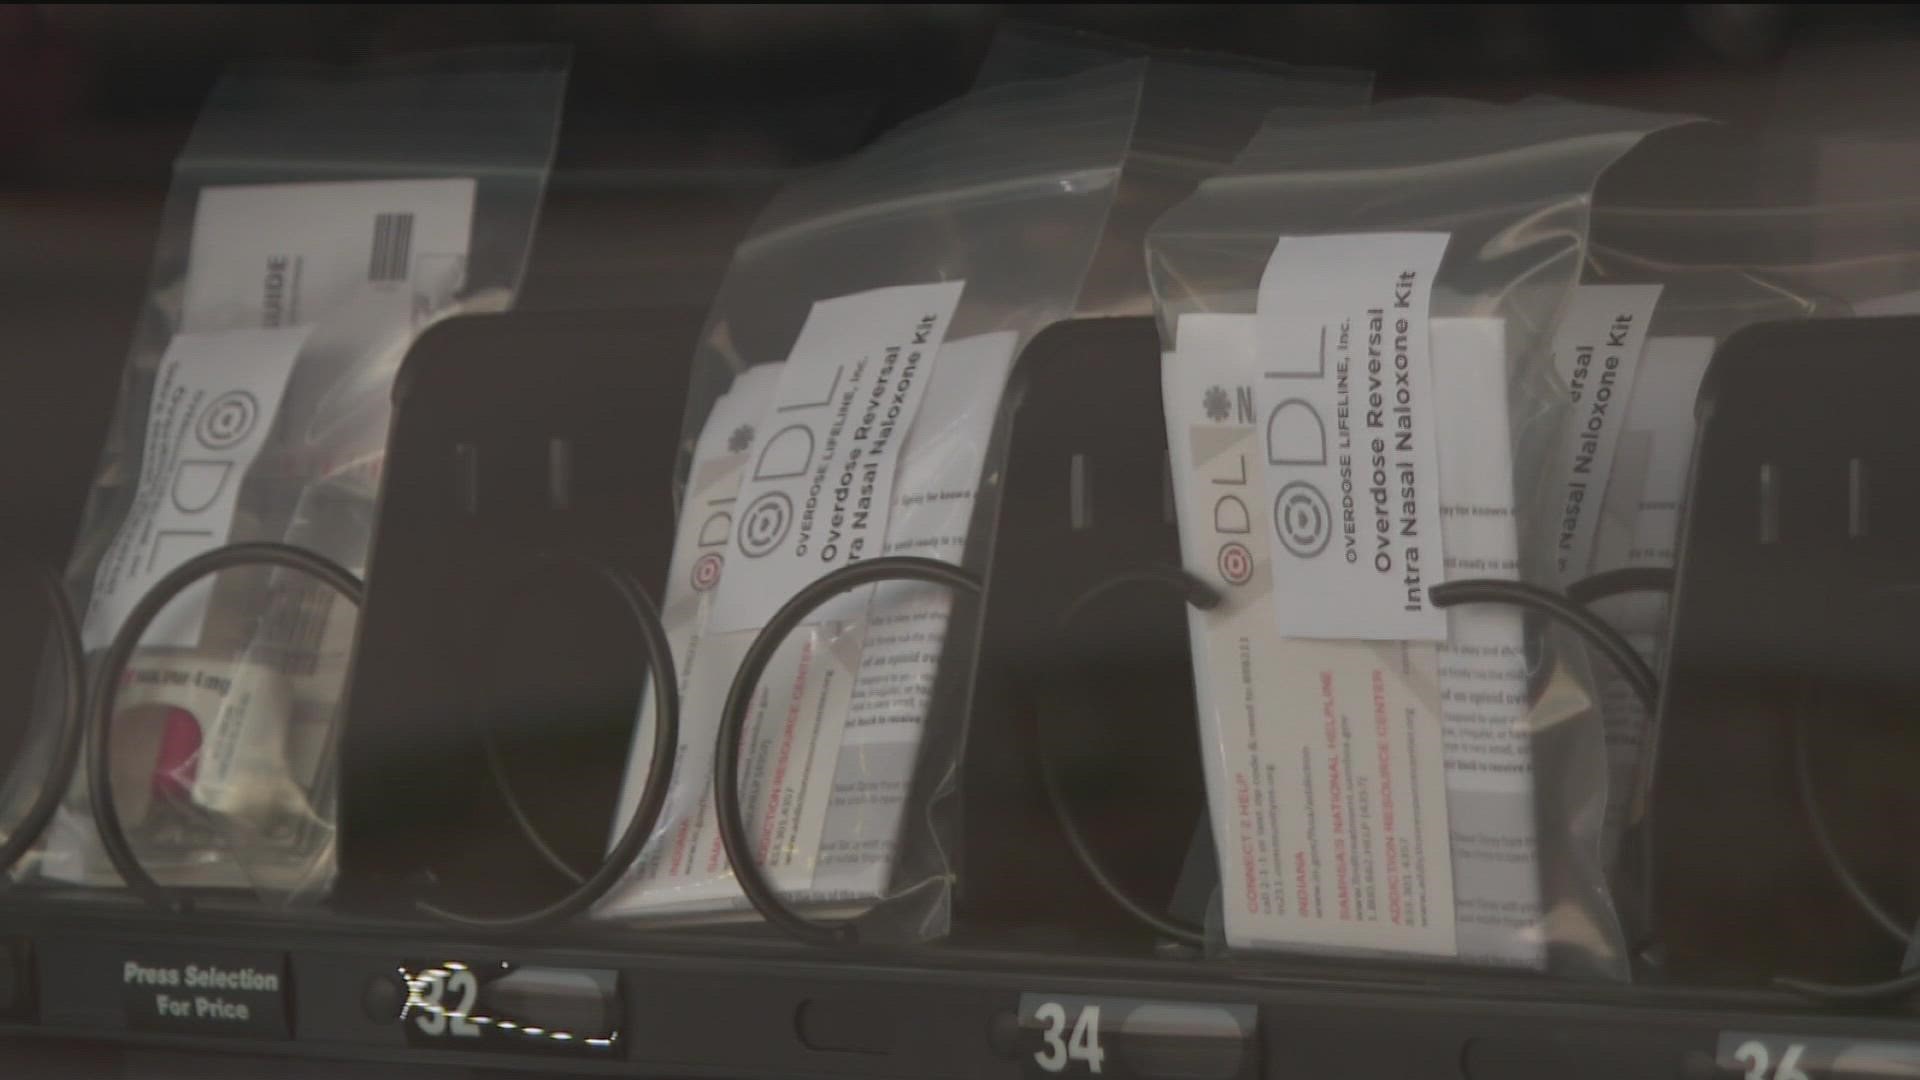 The County will install 12 naloxone vending machines throughout the region by next summer, with half of them scheduled to go up by the end of this year.